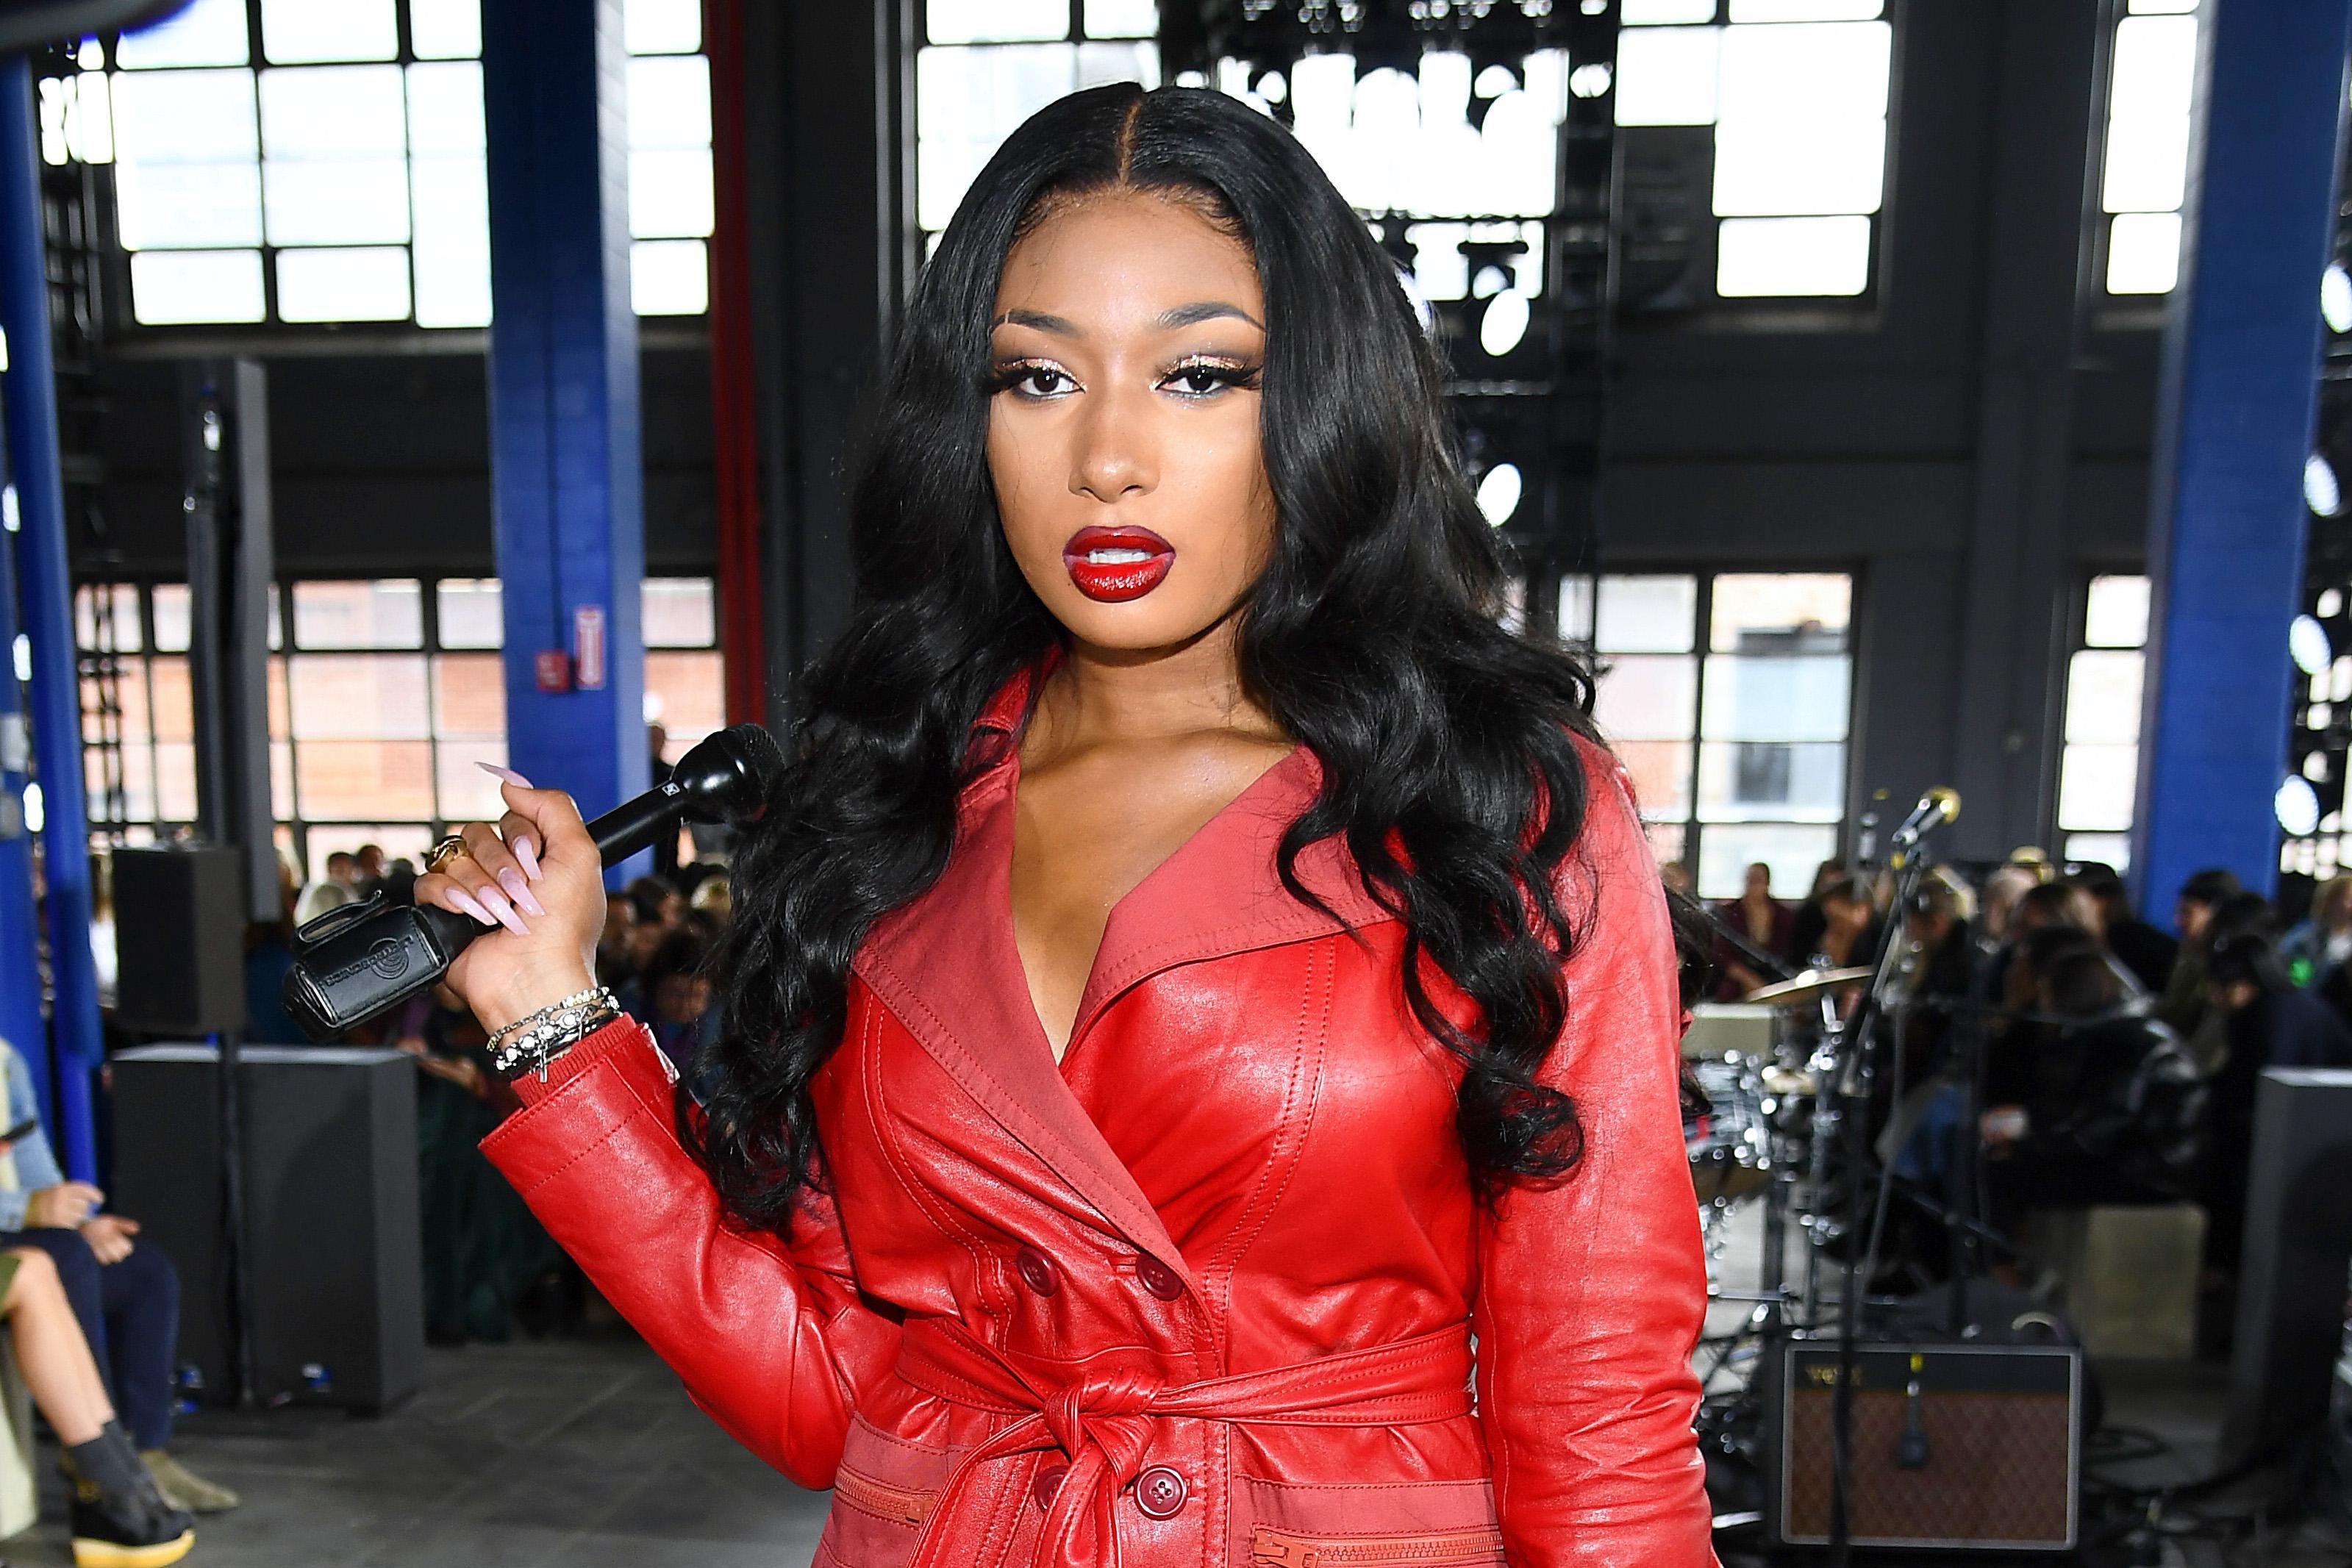 Megan Thee Stallion wears red while standing in a stadium.